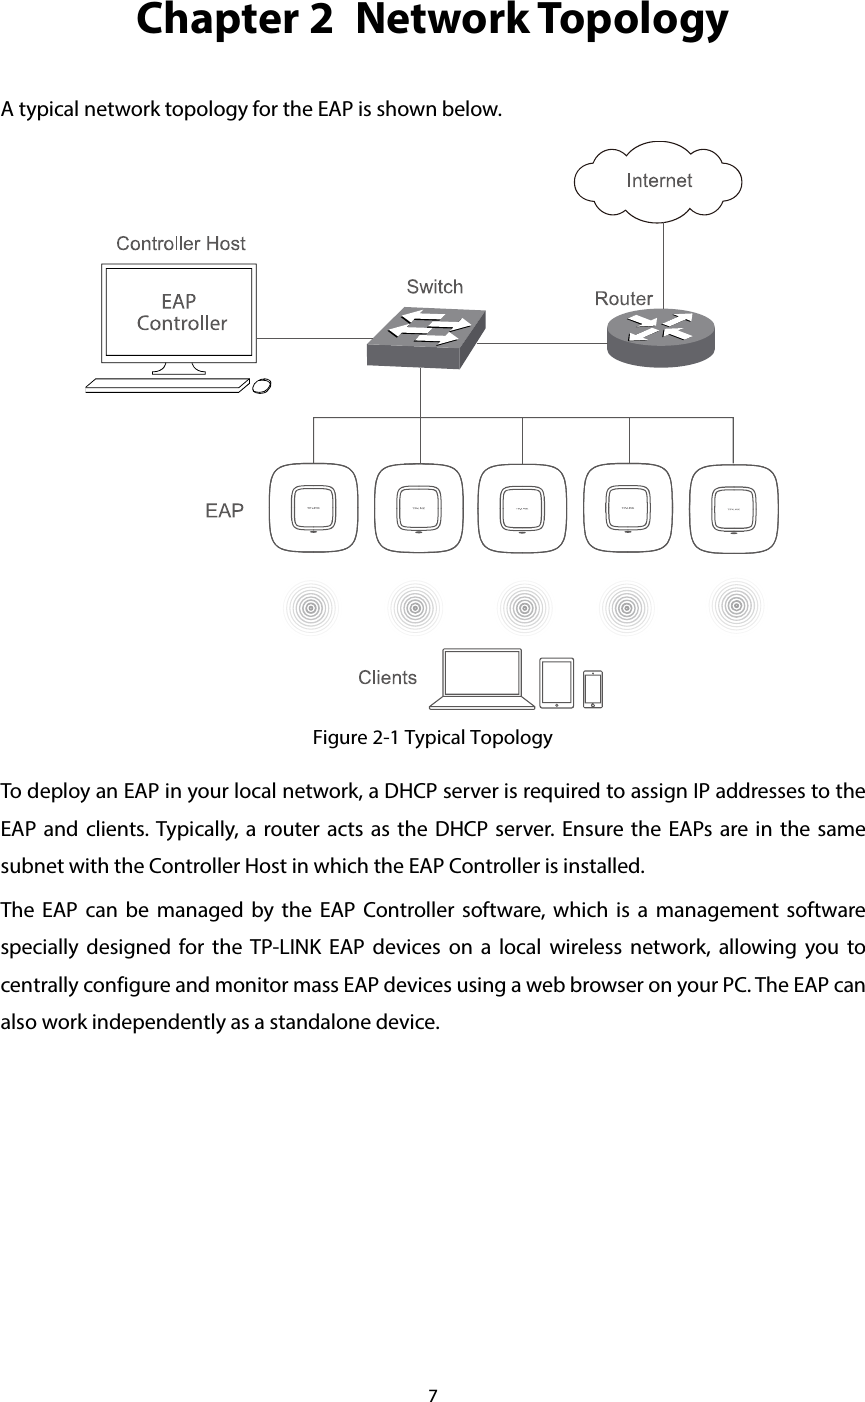 7  Chapter 2  Network Topology A typical network topology for the EAP is shown below.  Figure 2-1 Typical Topology To deploy an EAP in your local network, a DHCP server is required to assign IP addresses to the EAP and clients. Typically, a router acts as the DHCP server. Ensure the EAPs are in the same subnet with the Controller Host in which the EAP Controller is installed. The EAP can be managed by the EAP Controller software, which is a management software specially designed for the TP-LINK EAP devices on a local wireless network, allowing you to centrally configure and monitor mass EAP devices using a web browser on your PC. The EAP can also work independently as a standalone device.     